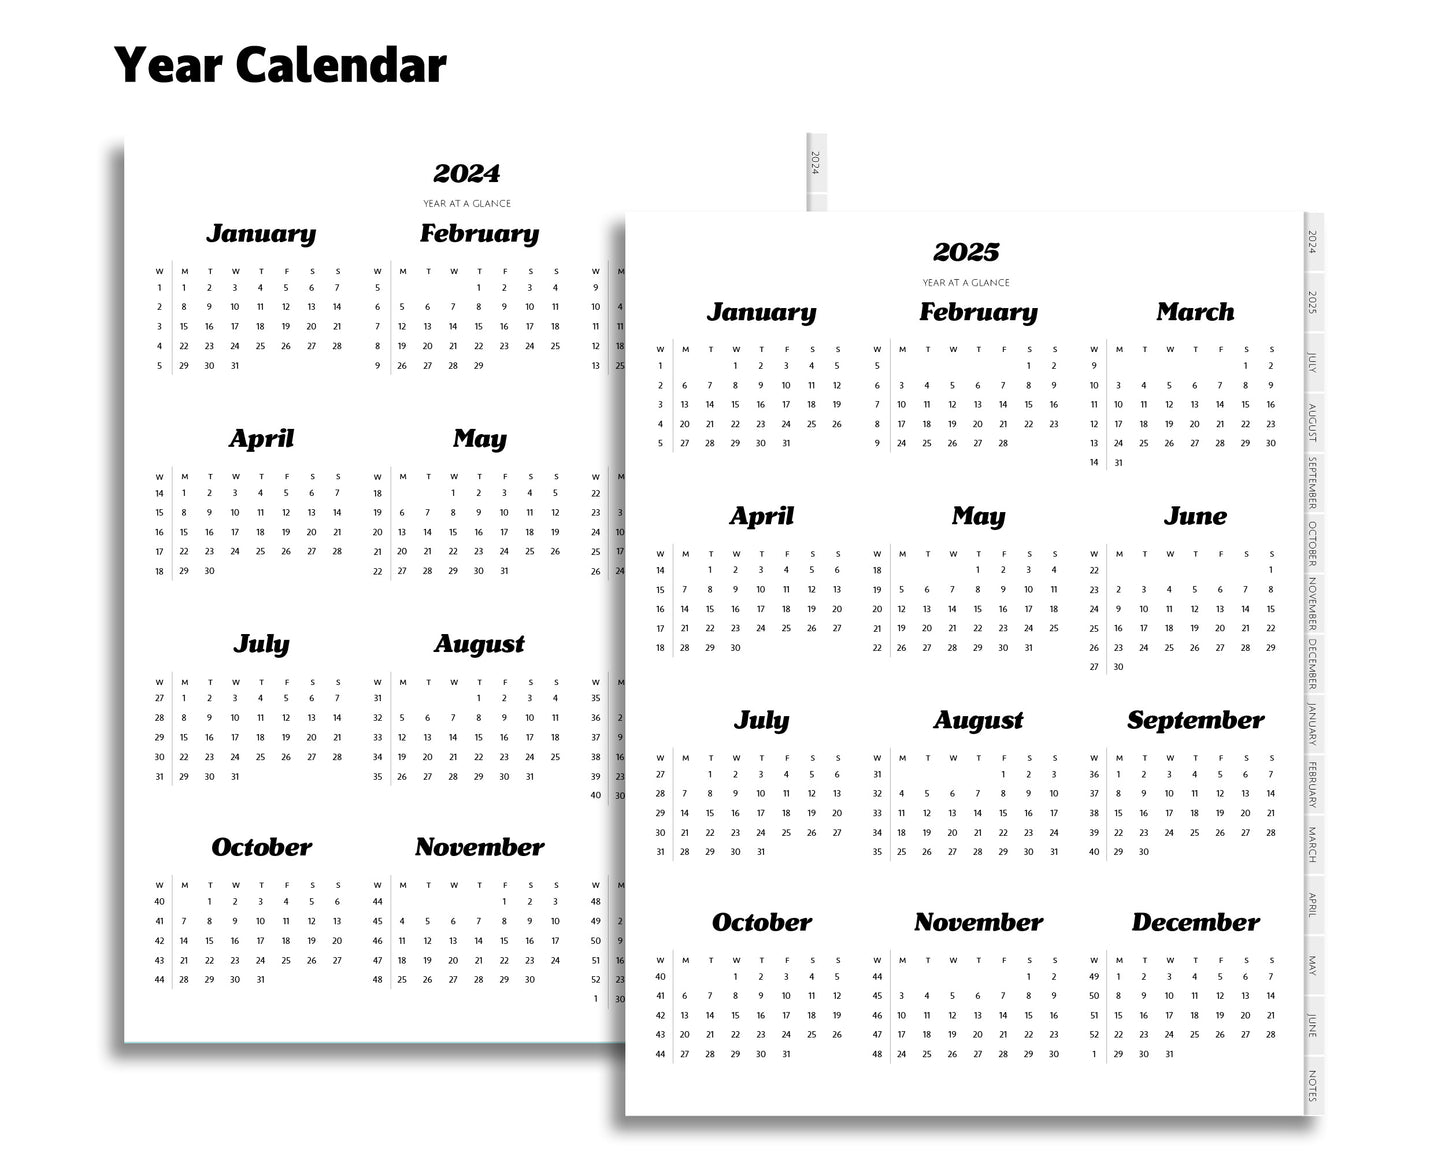 2024 2025 Mid Year Monthly Planner | Simple Minimal